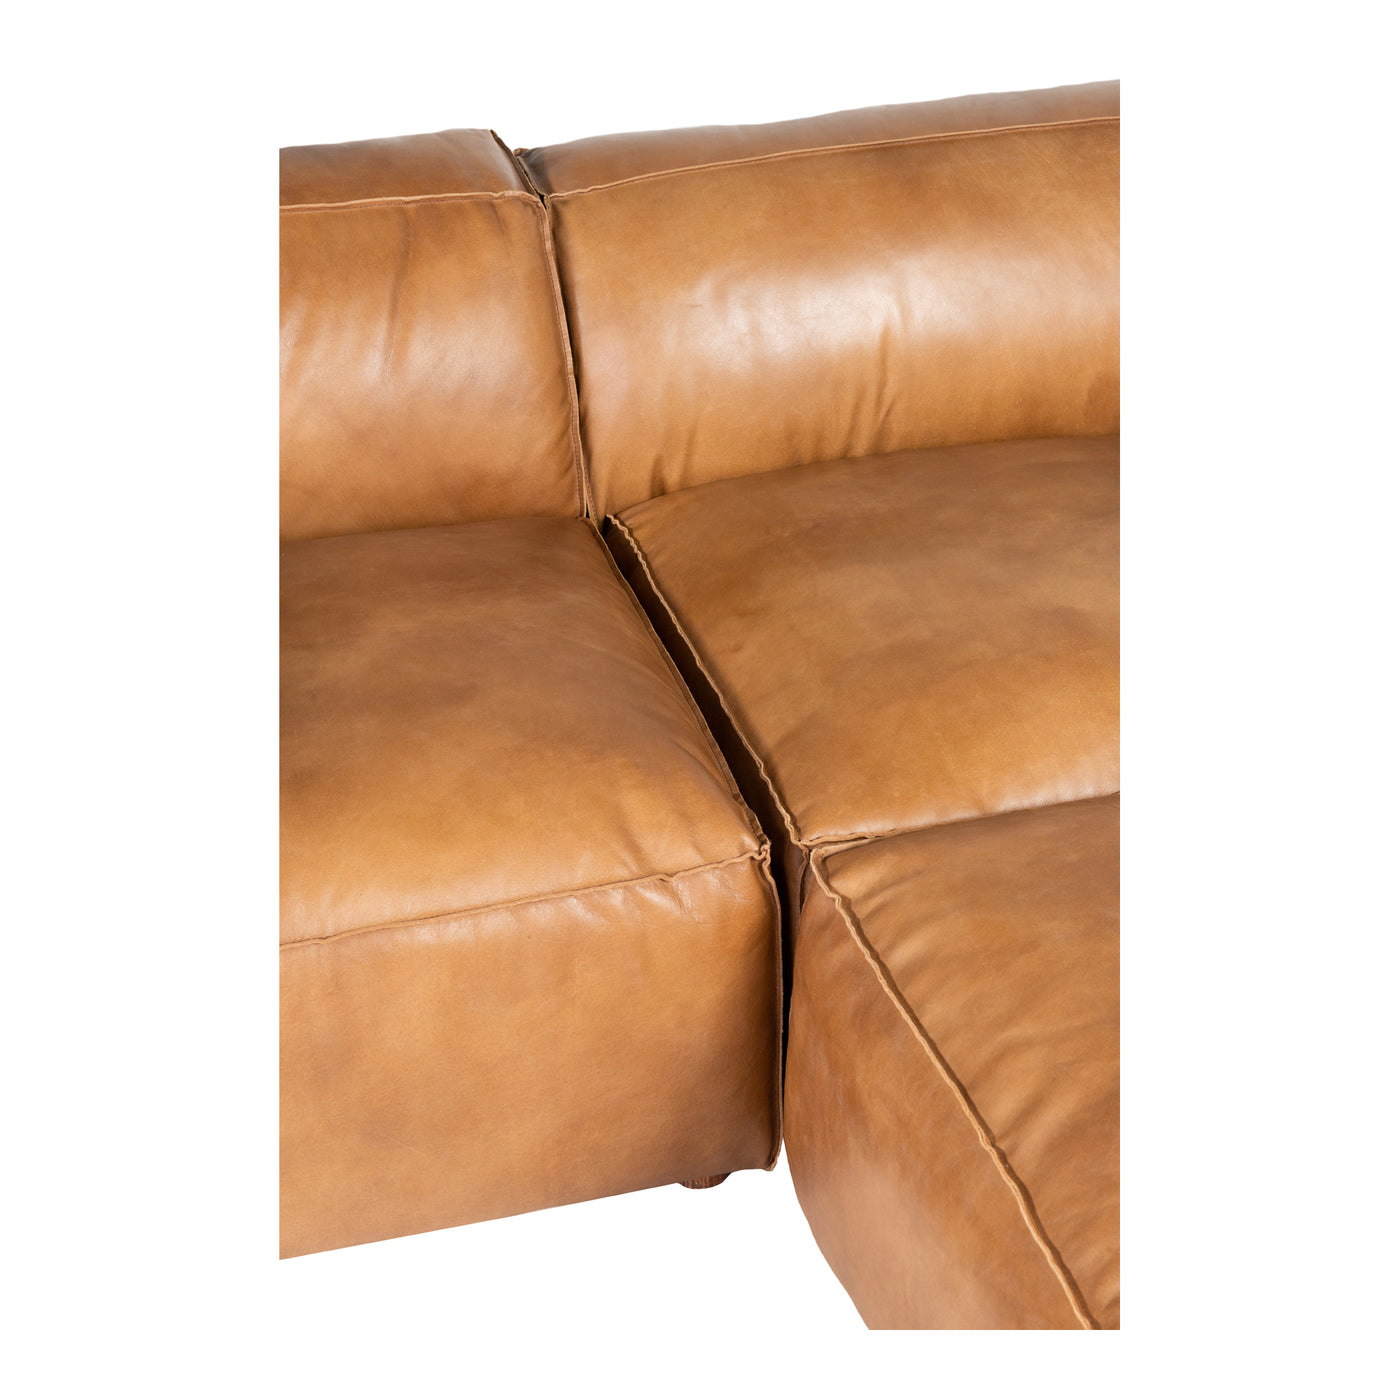 Ever so soft top-grain buffalo leather invites you to melt into the compact, stylish Luxe lounge sectional sofa. Its inten...